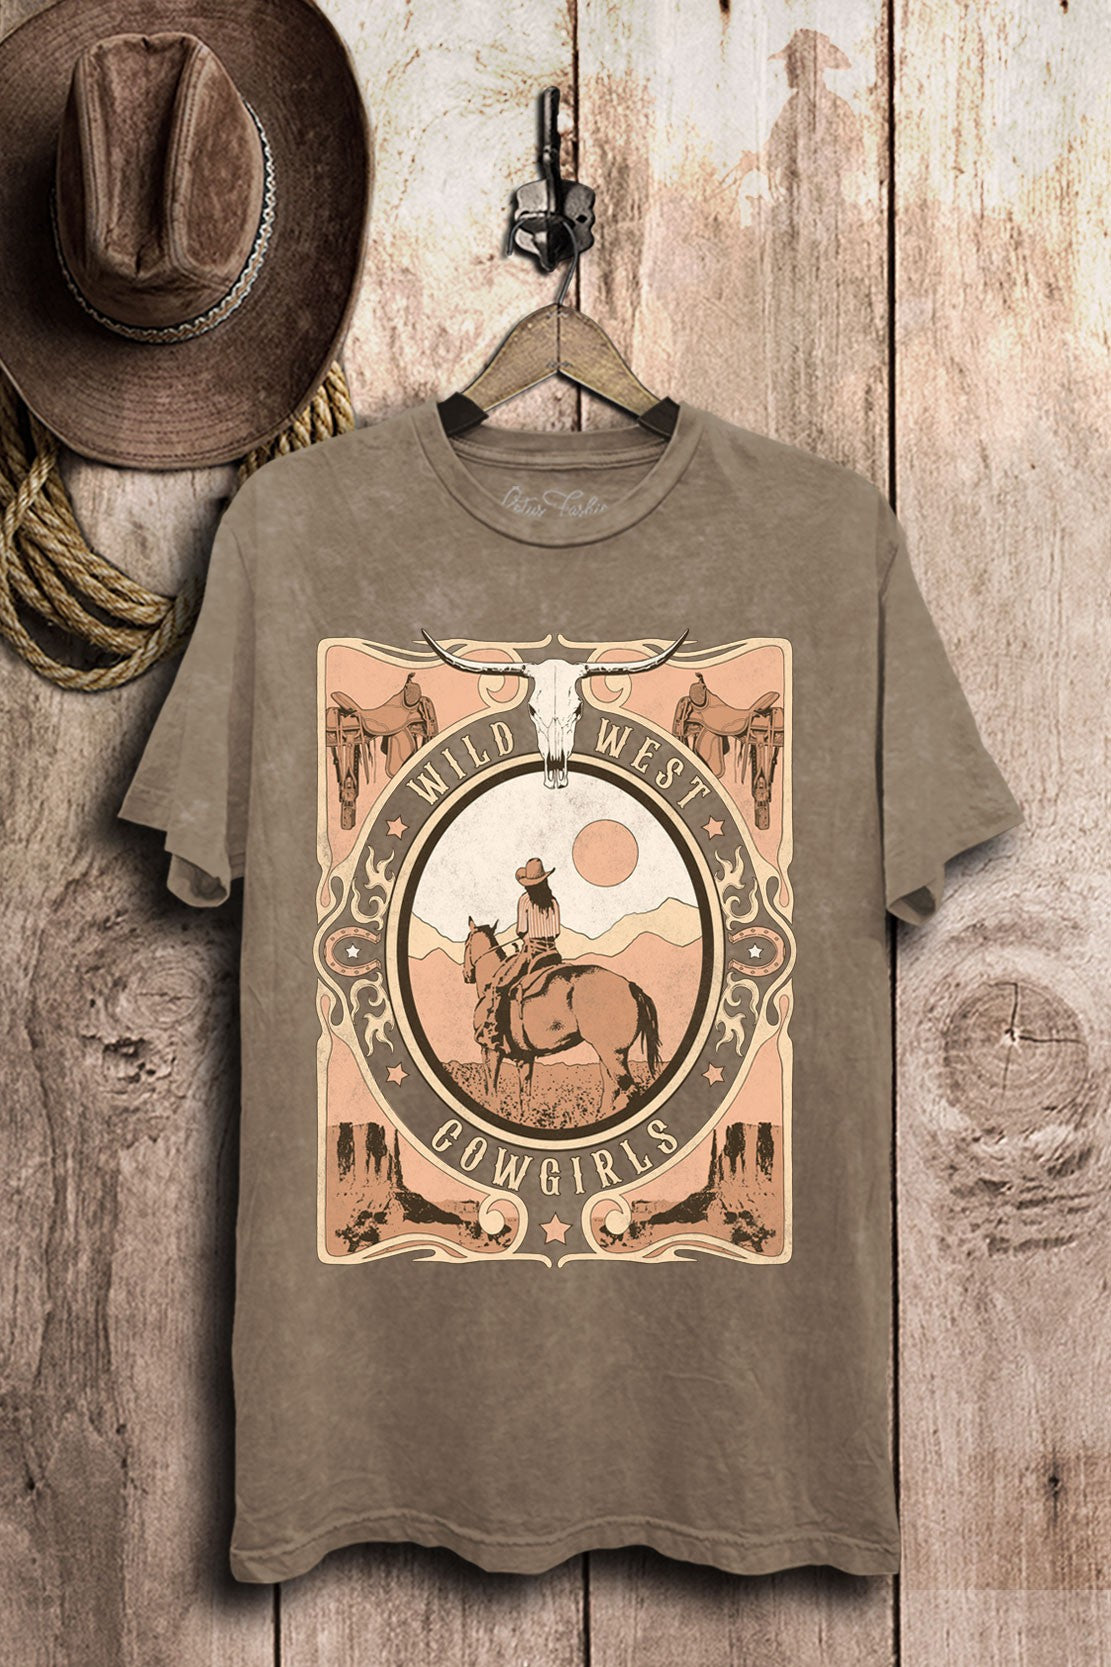 WILD WEST COWGIRL GRAPHIC TOP